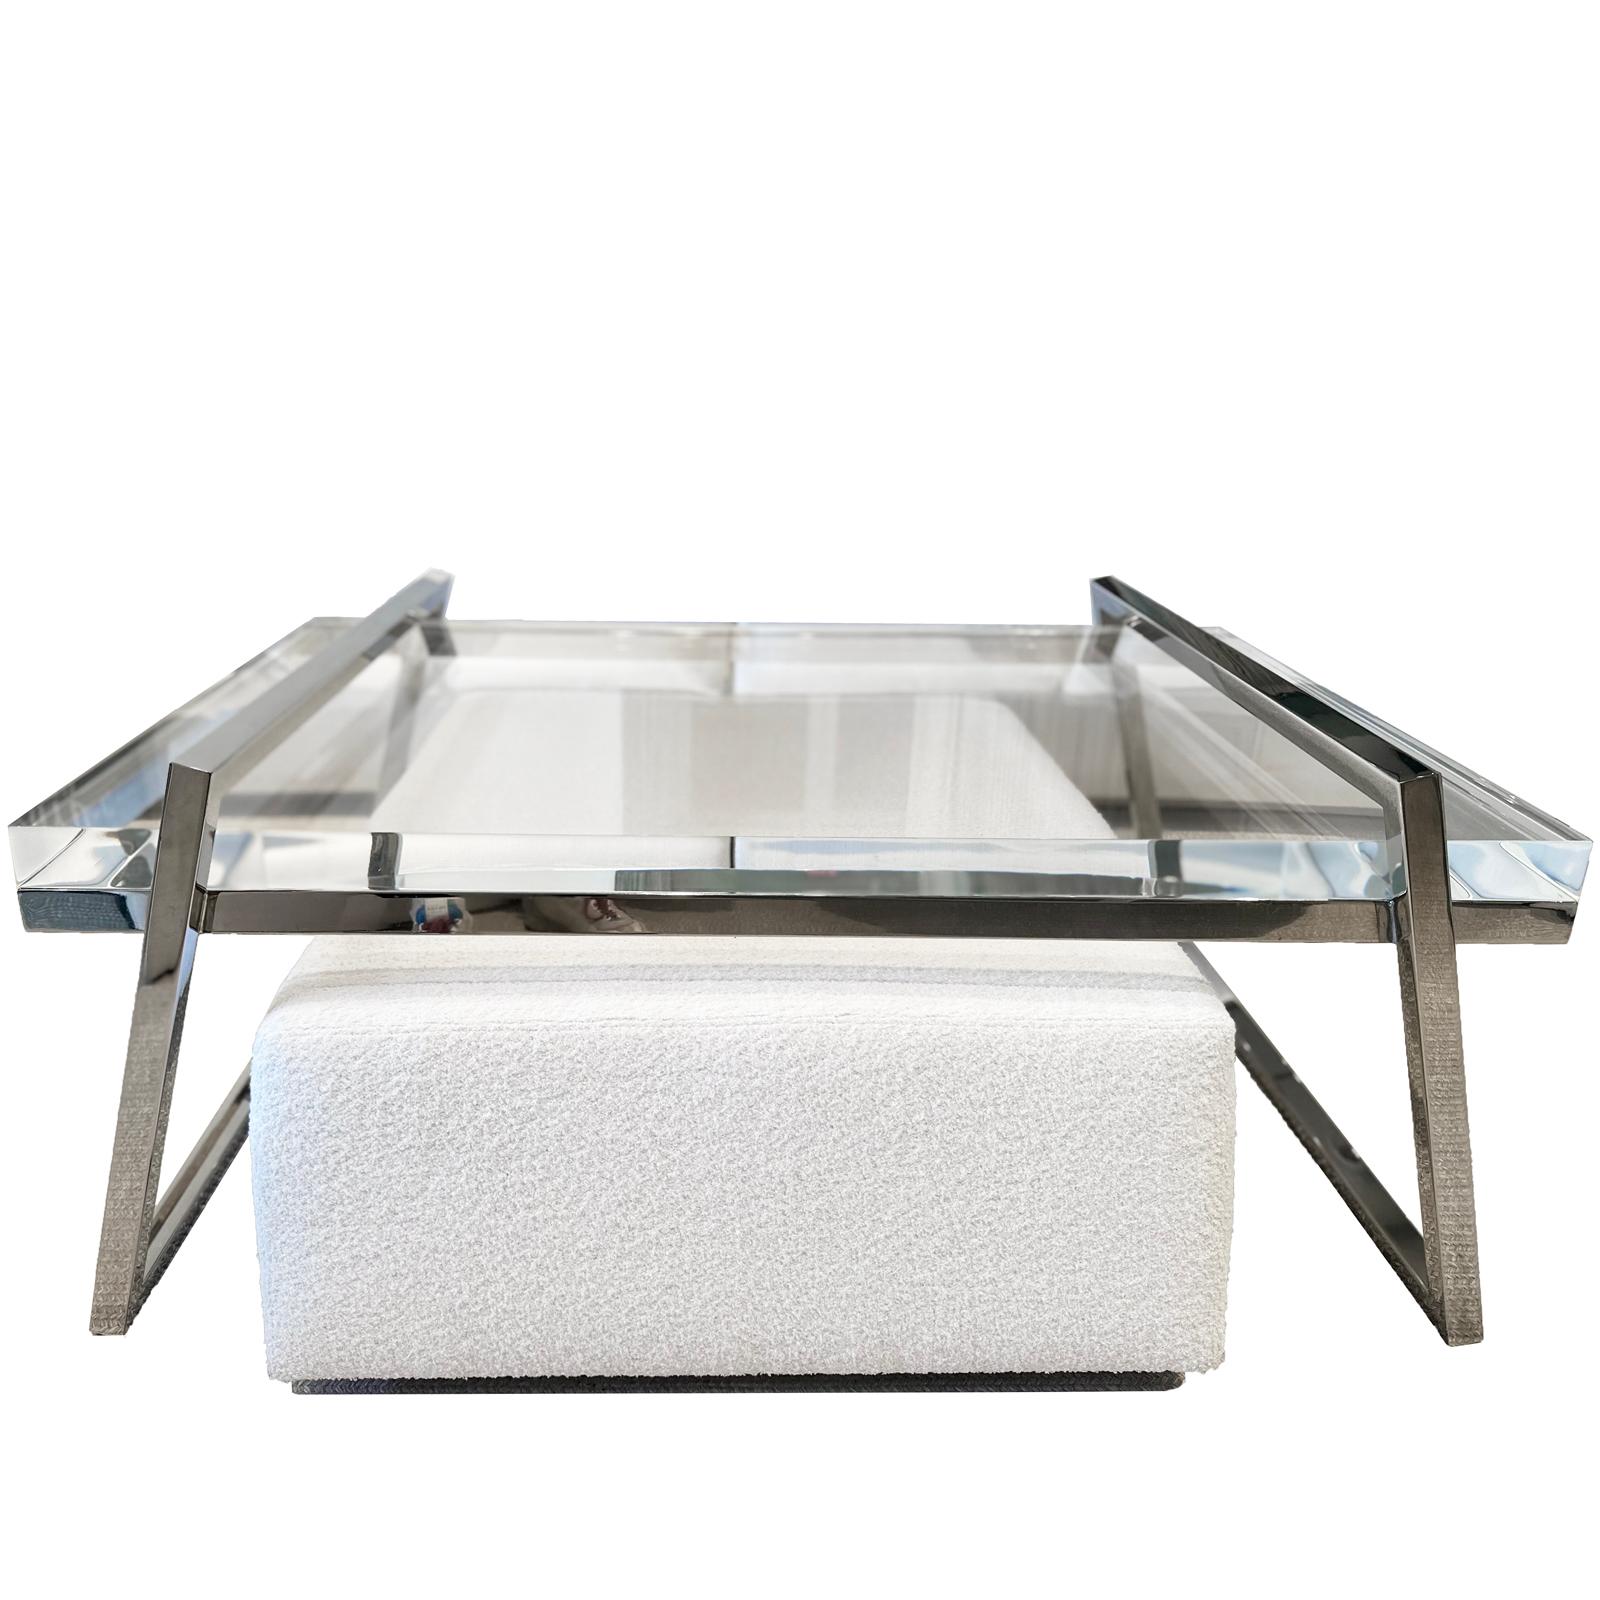 Inspired by the Brooklyn Bridge Shape, the New Yorker Coffee table combines opulent metal options with a pristine 2